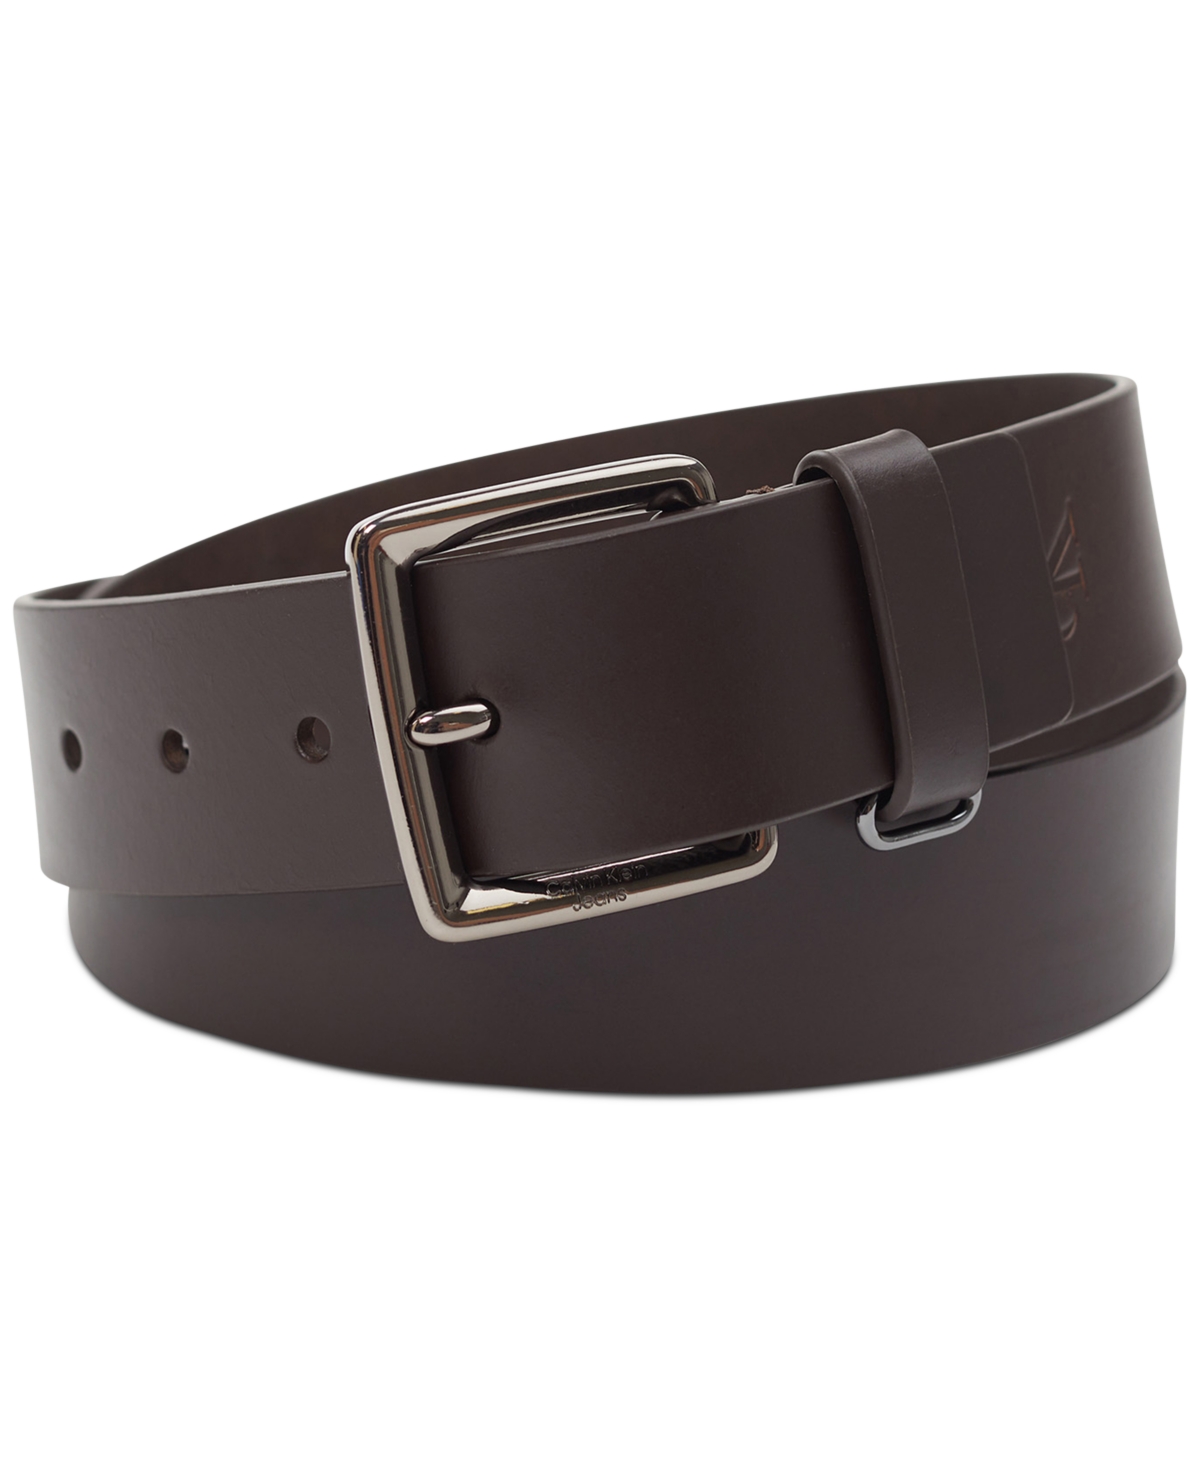 Jeans Men's Leather Belt with Keeper Ring - Dark Brown